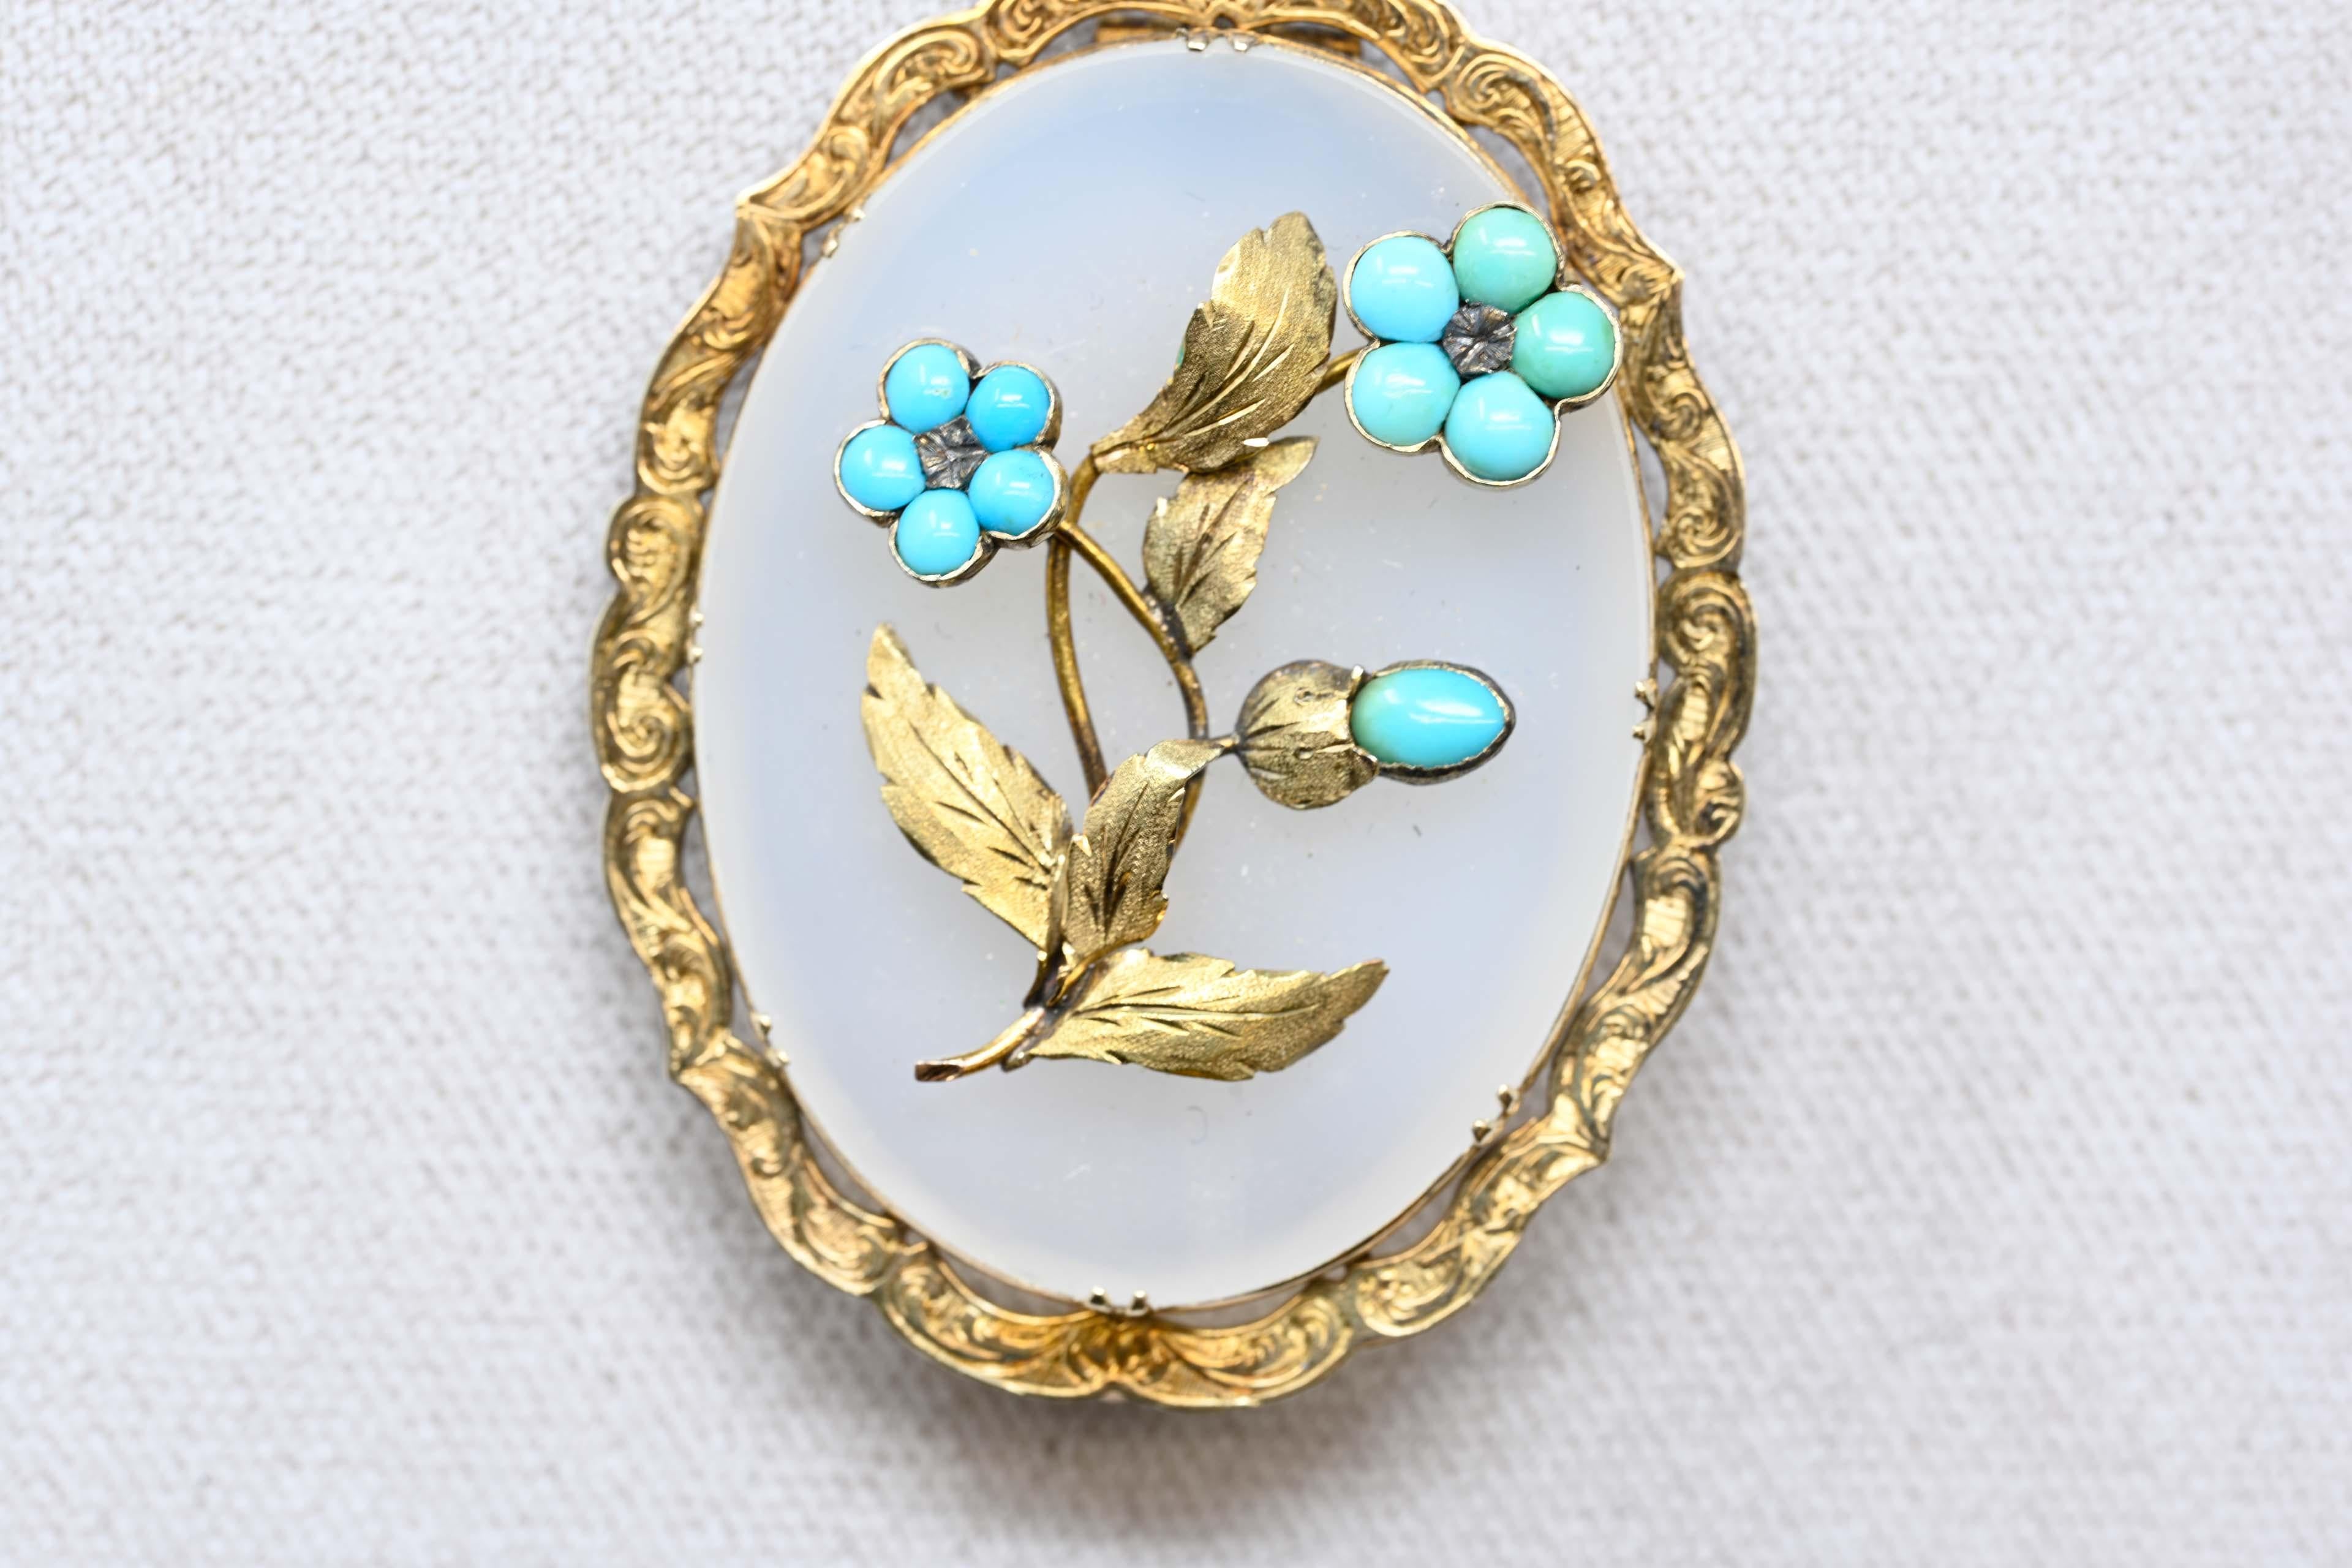 Victorian 14k Gold turquoise & calcedony brooch acid tested, made in Canada circa 1900. No maker marks, weighs 14.8 grams. Measures 45mm x 38mm.